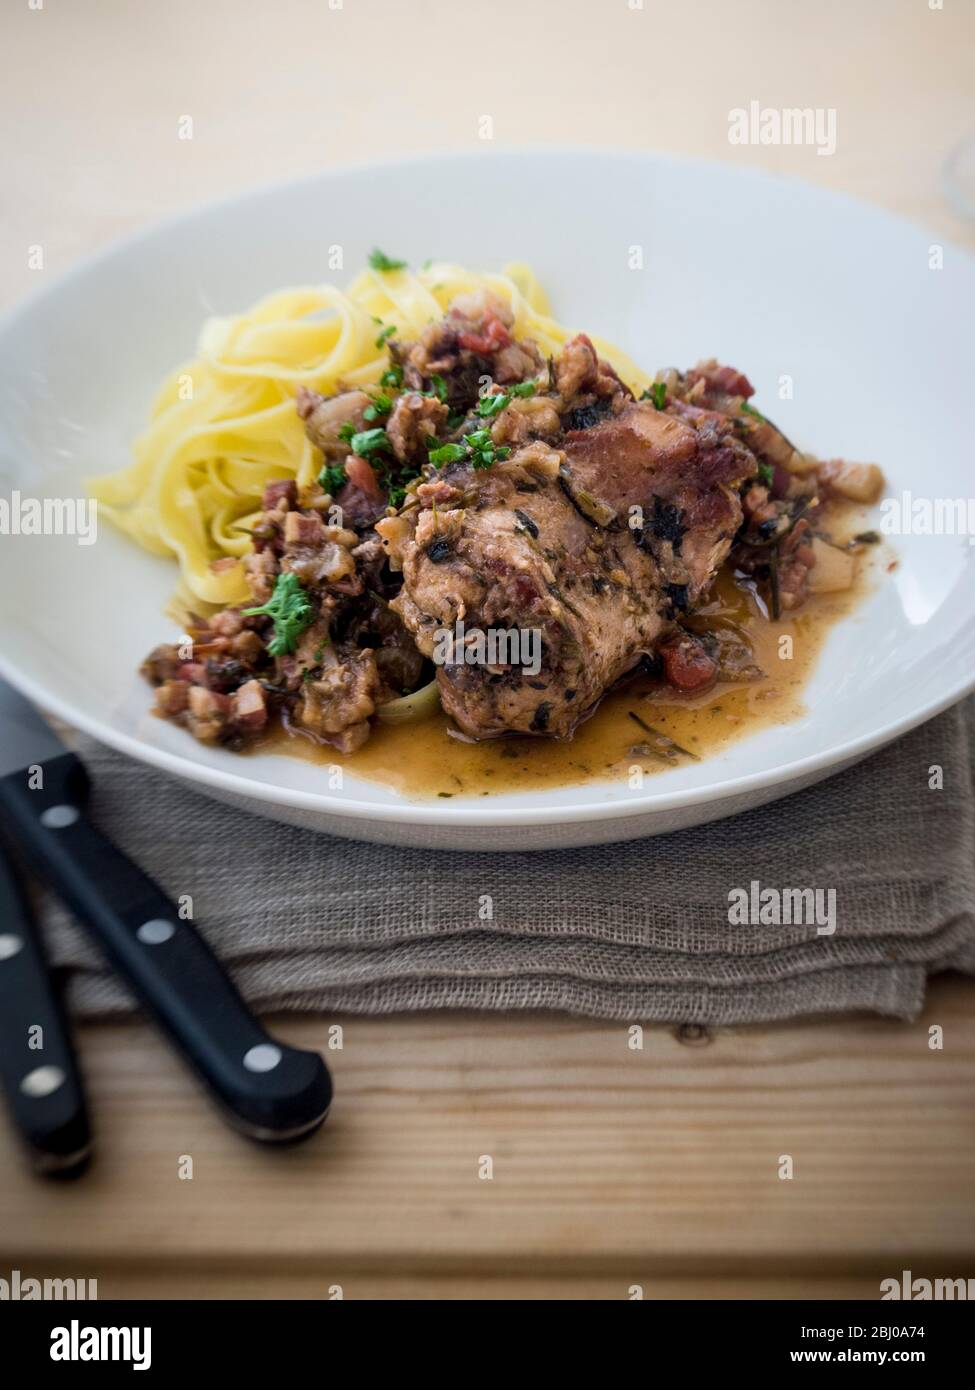 Saddle of rabbit cooked in wine and stock, with shallots, herbs and cherry tomatoes, served with noodles Stock Photo